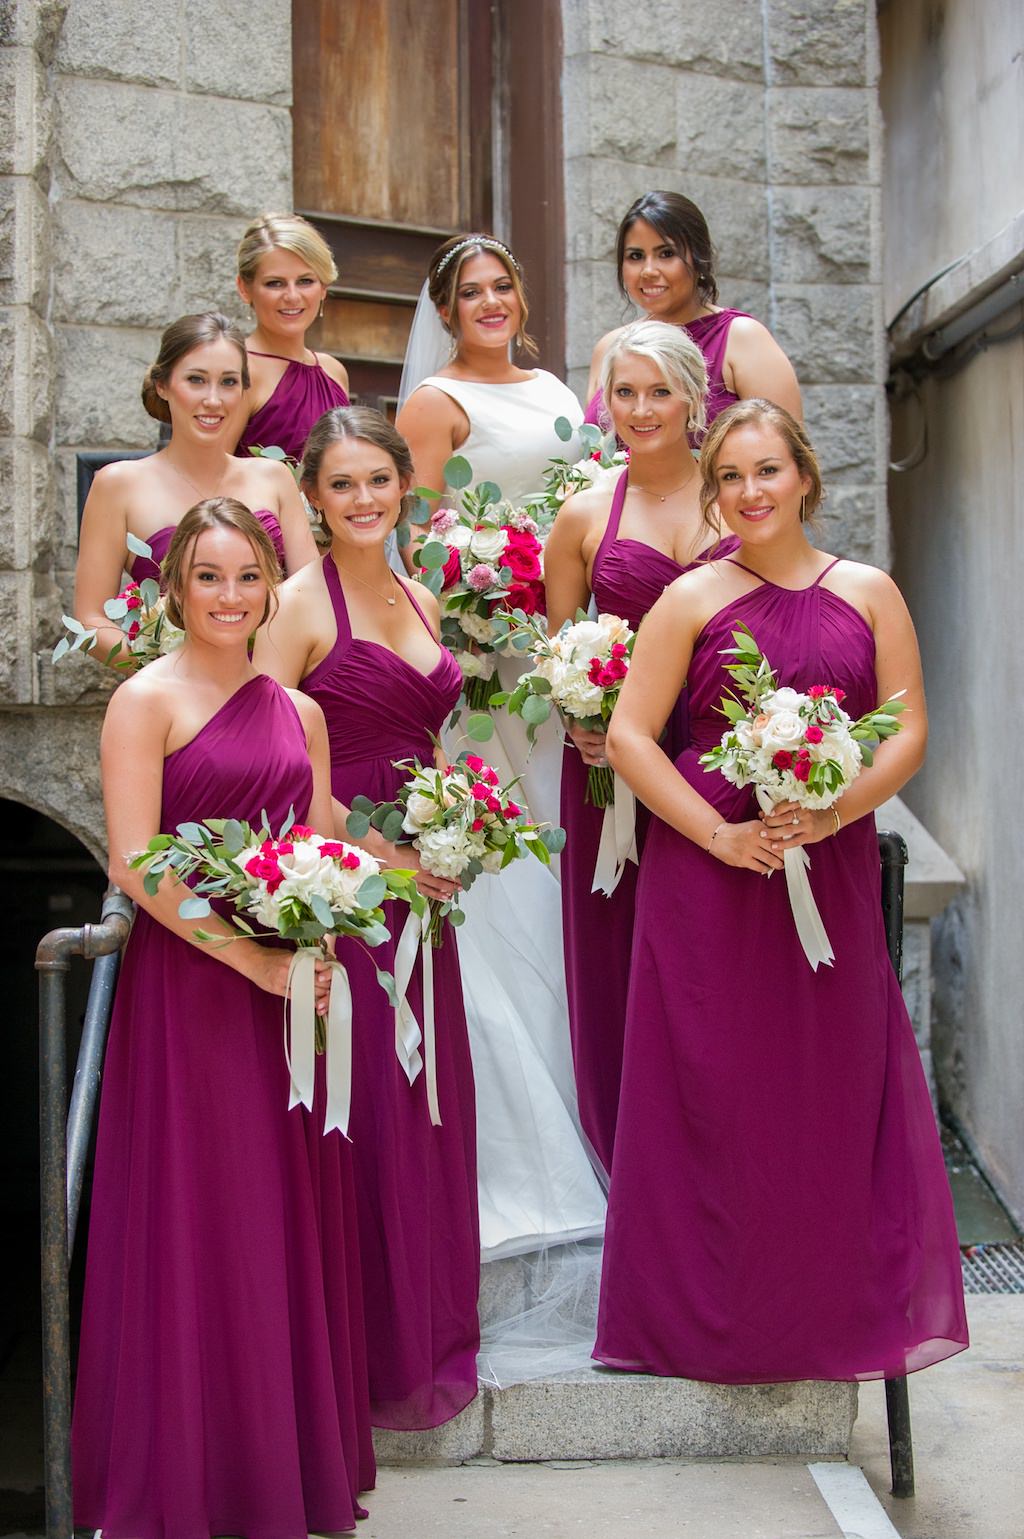 Outdoor Church Steps Bridal Party Portrait with Magenta and White Rose with Greenery and Ribbon Bouquets, Bridesmaids in Mismatched Mauve Dresses | Tampa Bay Wedding Photographer Andi Diamond Photography